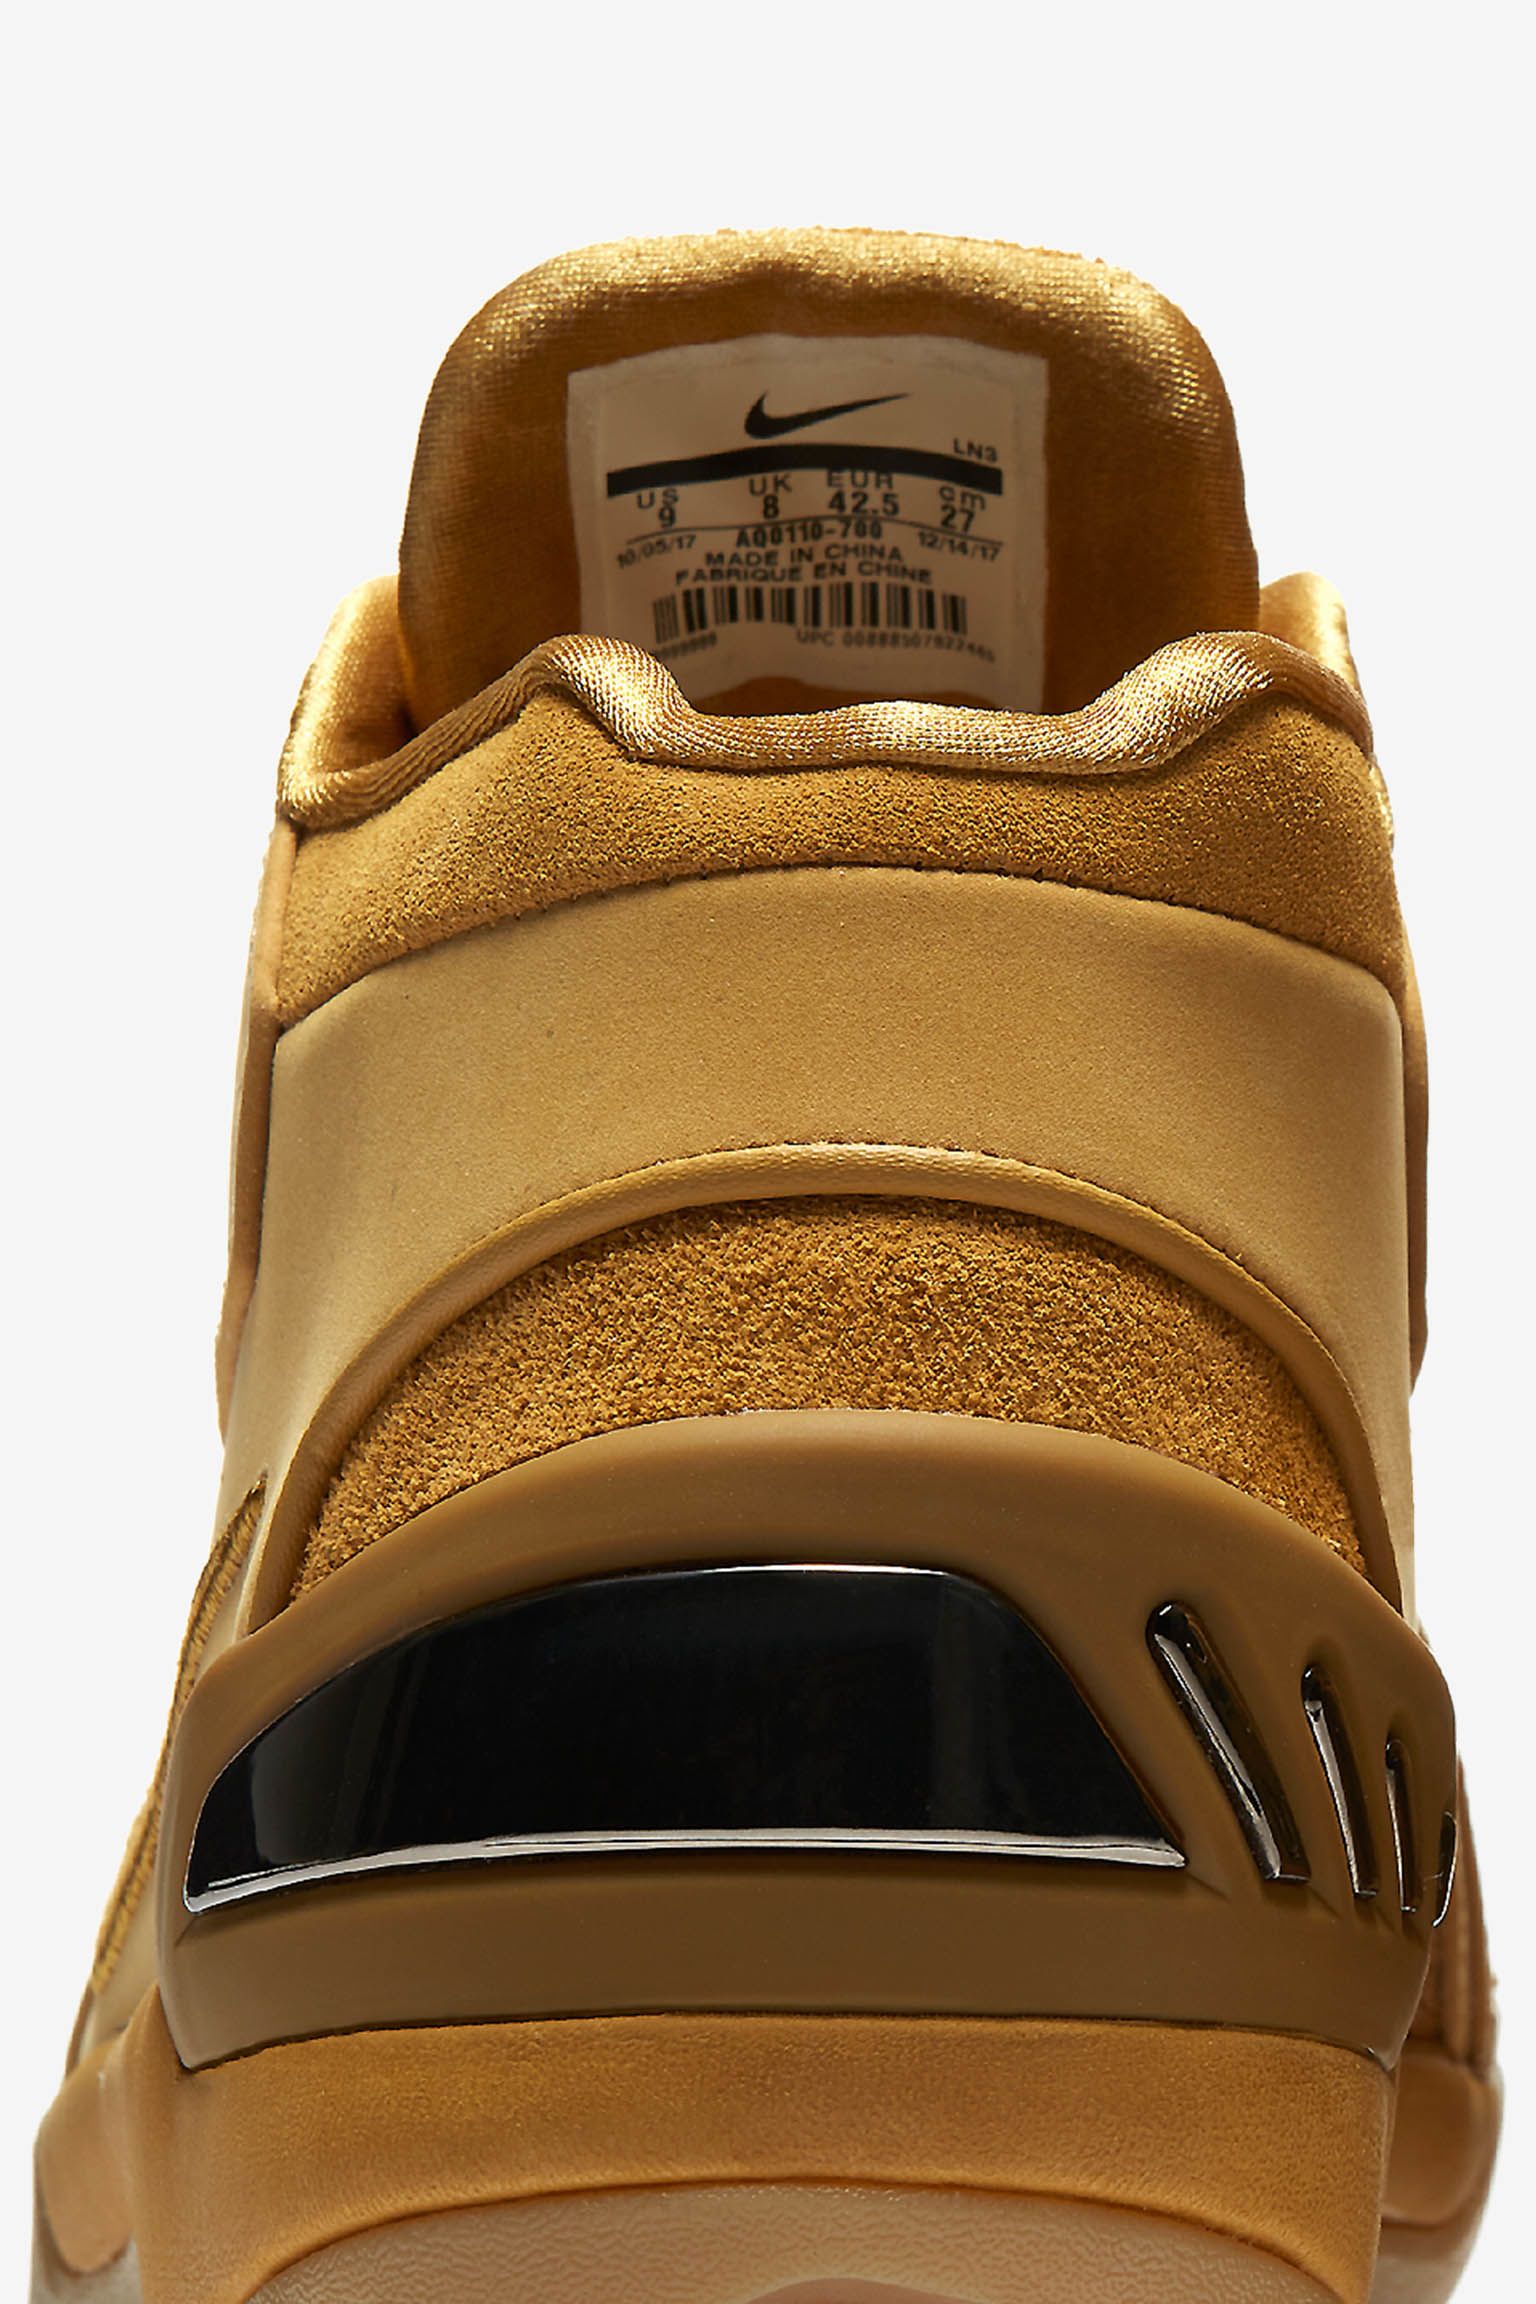 Nike Air Zoom Generation 'Wheat Gold' Release Date. Nike SNKRS